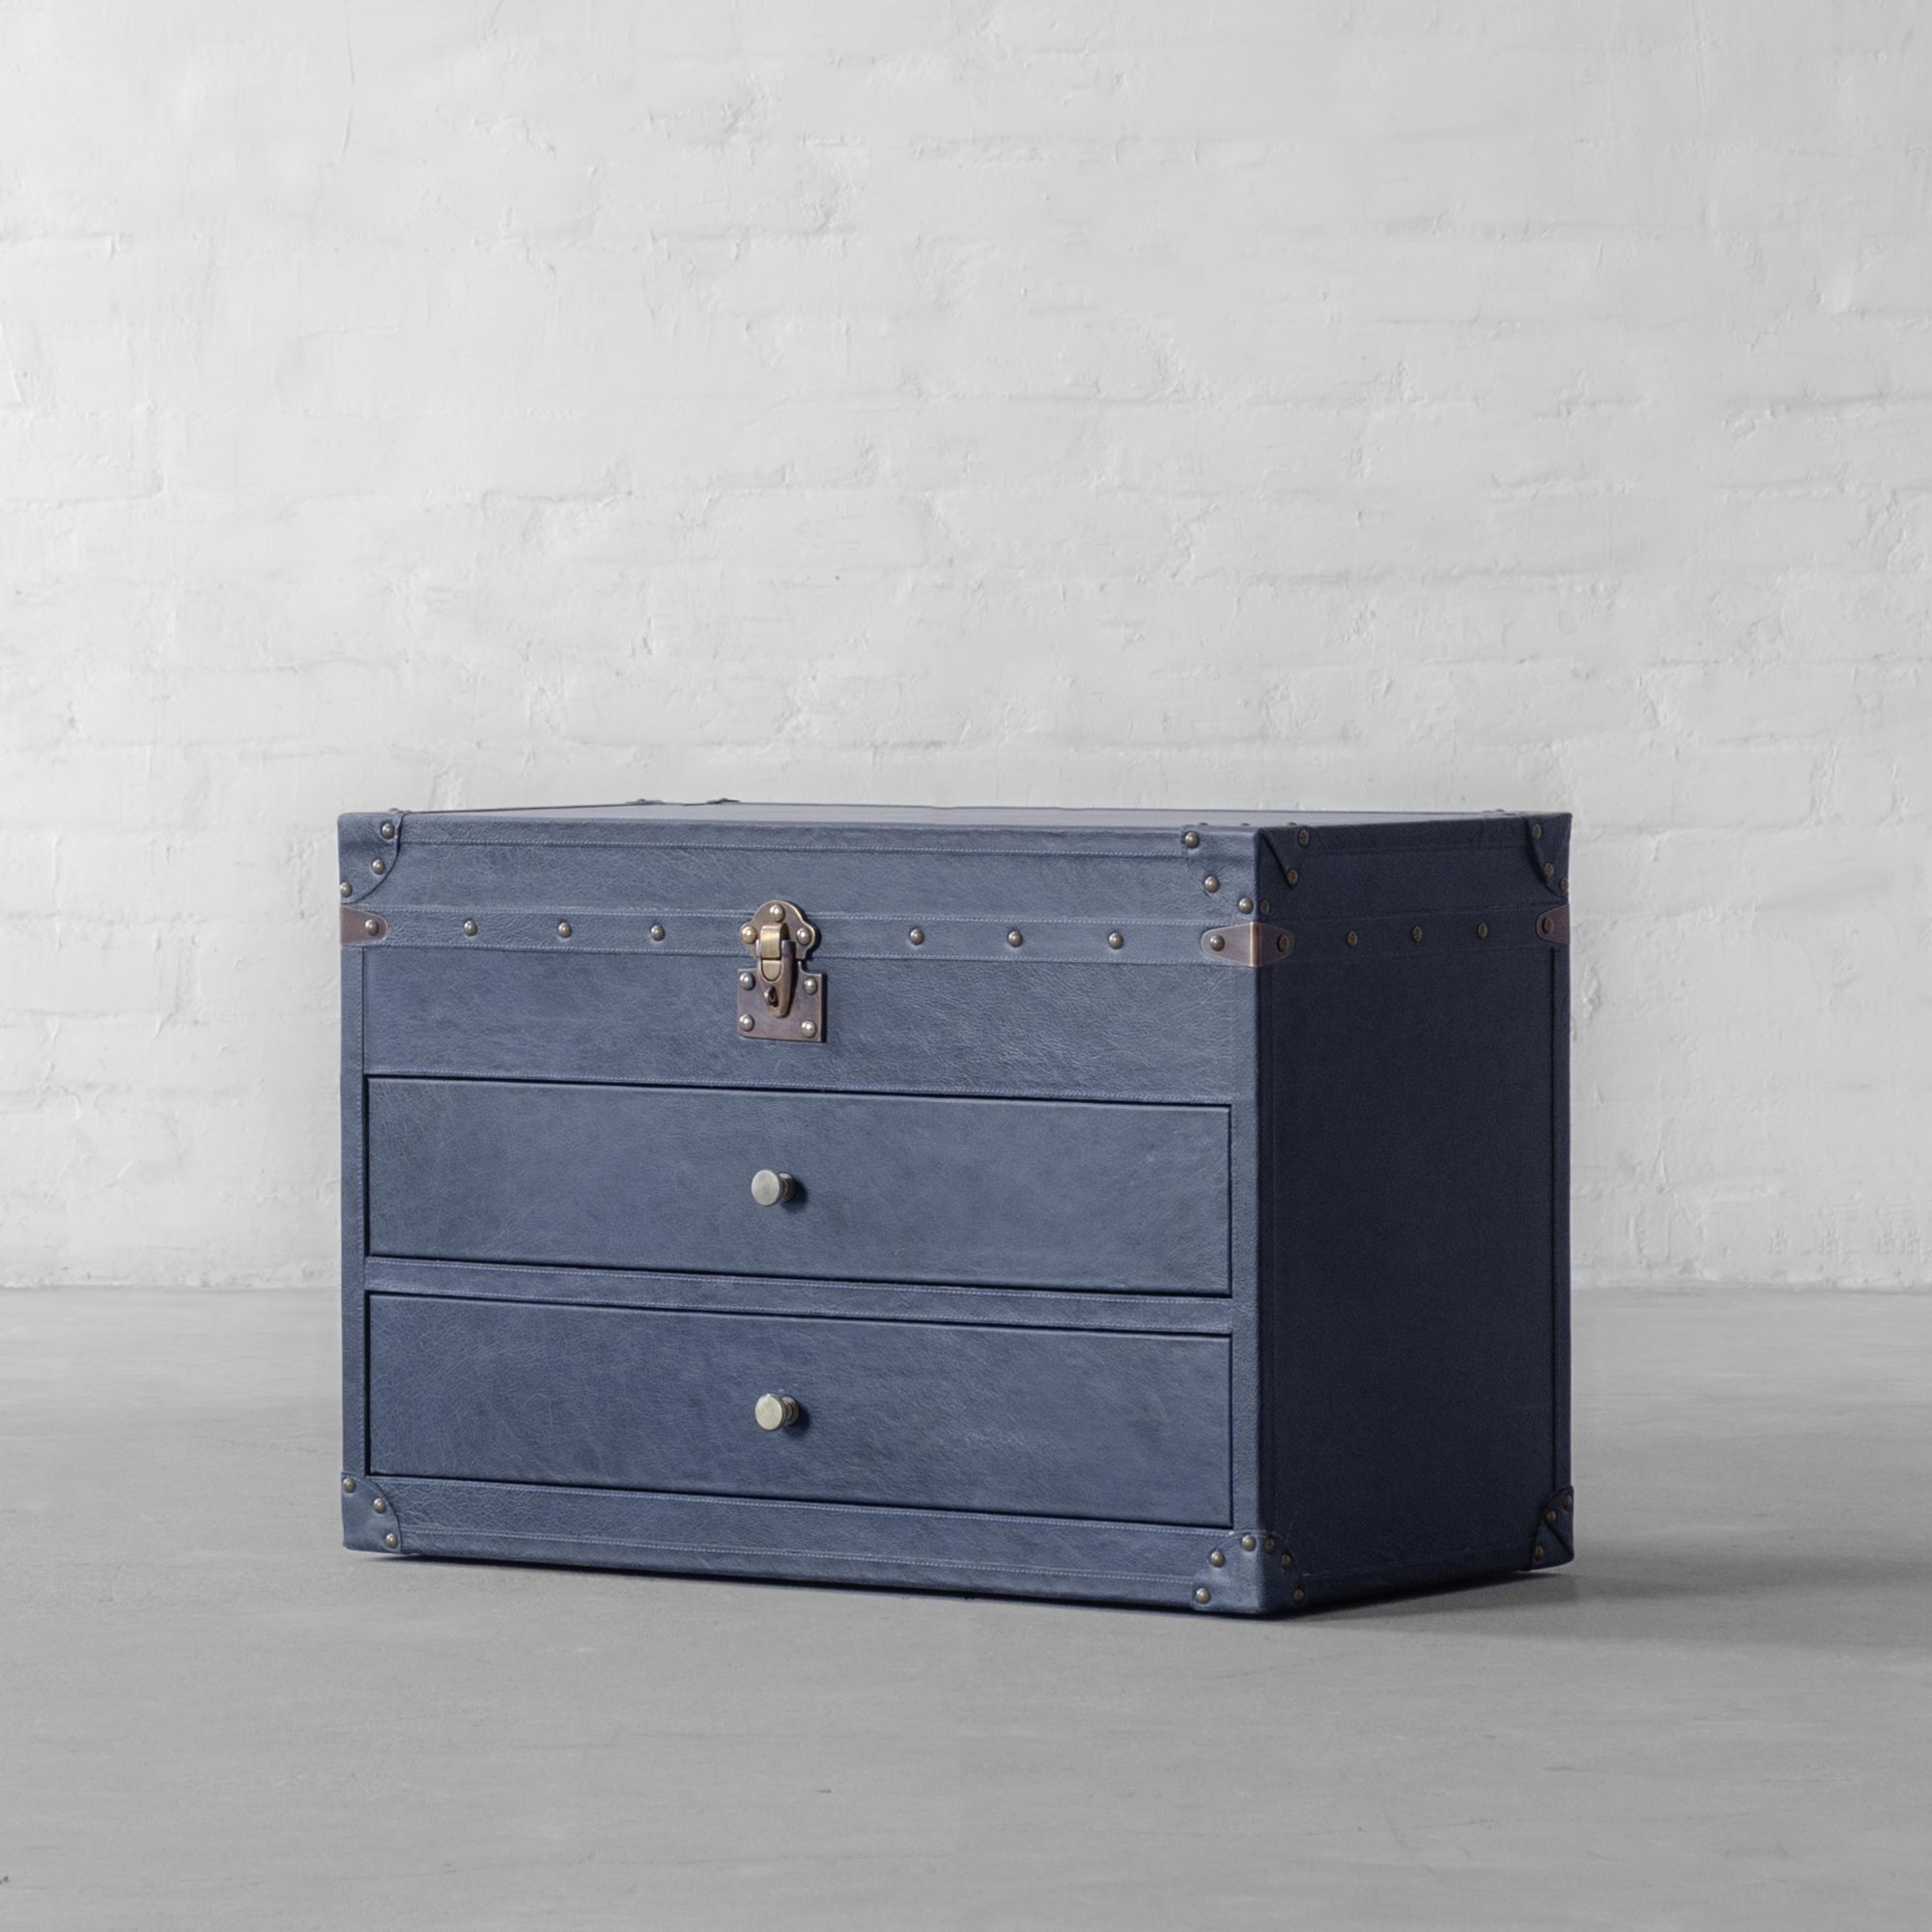 Jodhpur Leather Trunk Bedside Table, Leather Trunk Side Table